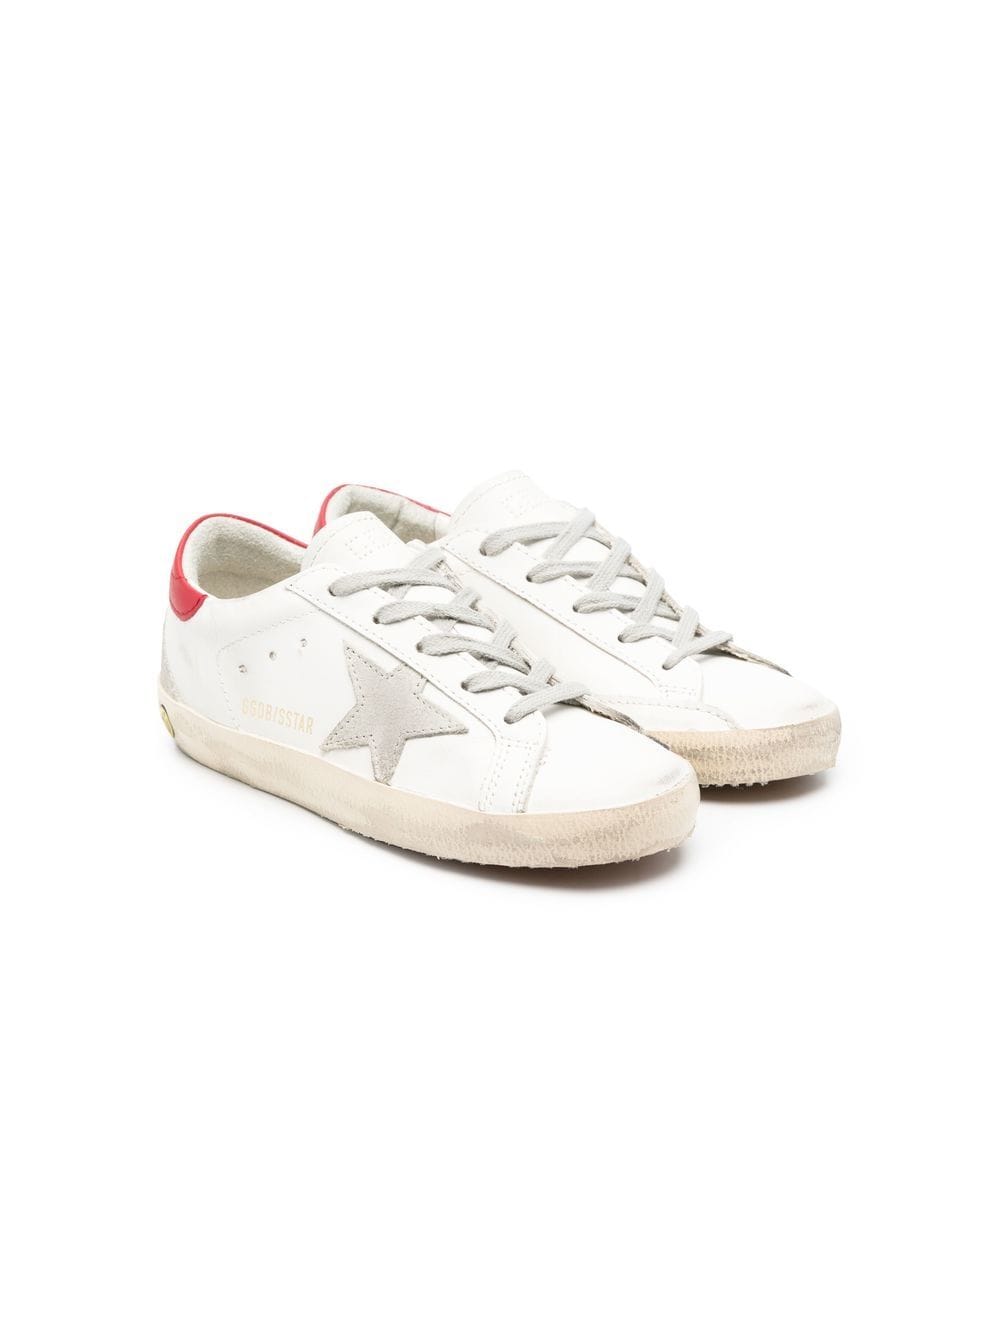 Sneakers bianche unisex